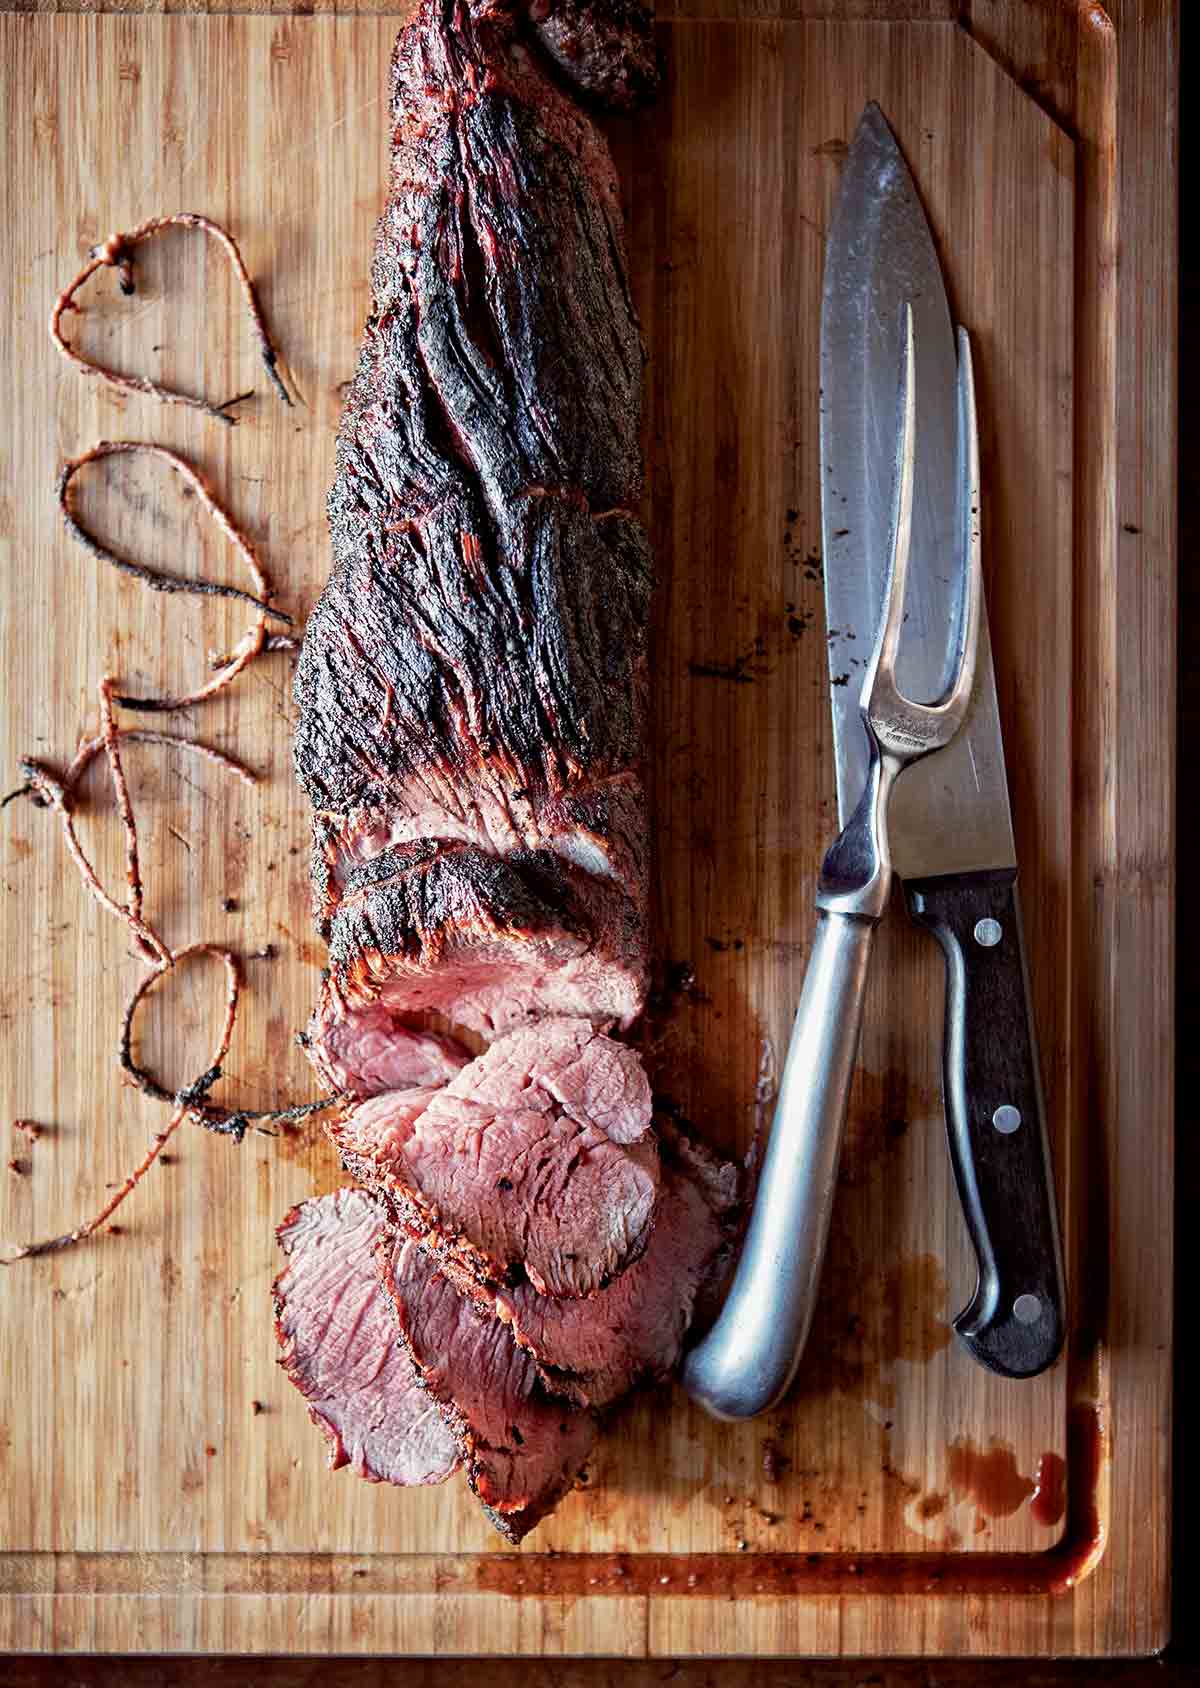 A whole grilled beef tenderloin, partially sliced on a wooden cutting board with a knife, meat fork, and twine beside it.